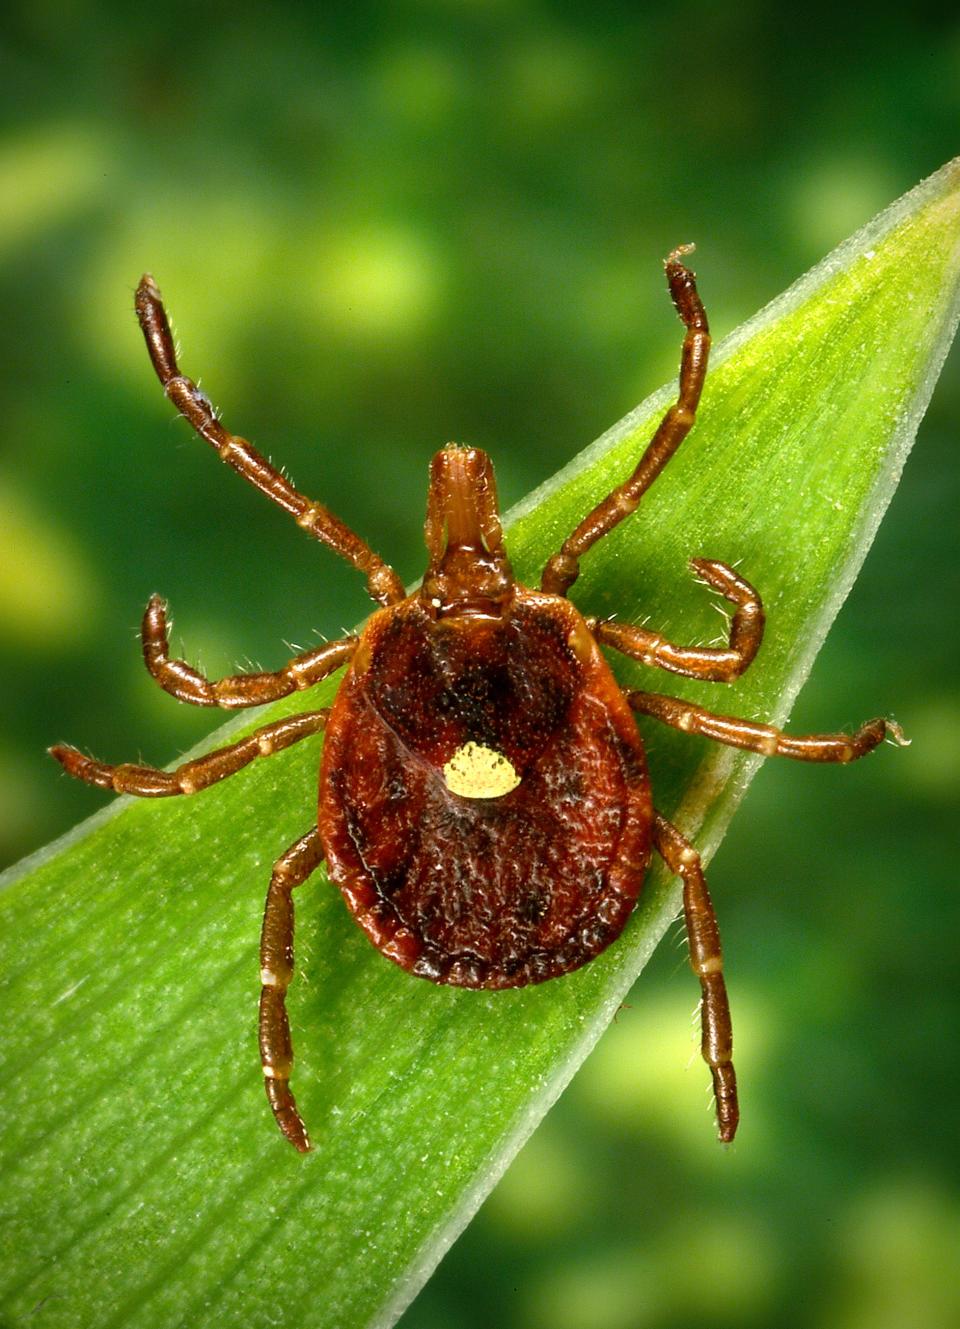 This photograph depicted a dorsal view of a female "lone star tick"(Amblyomma americanum).